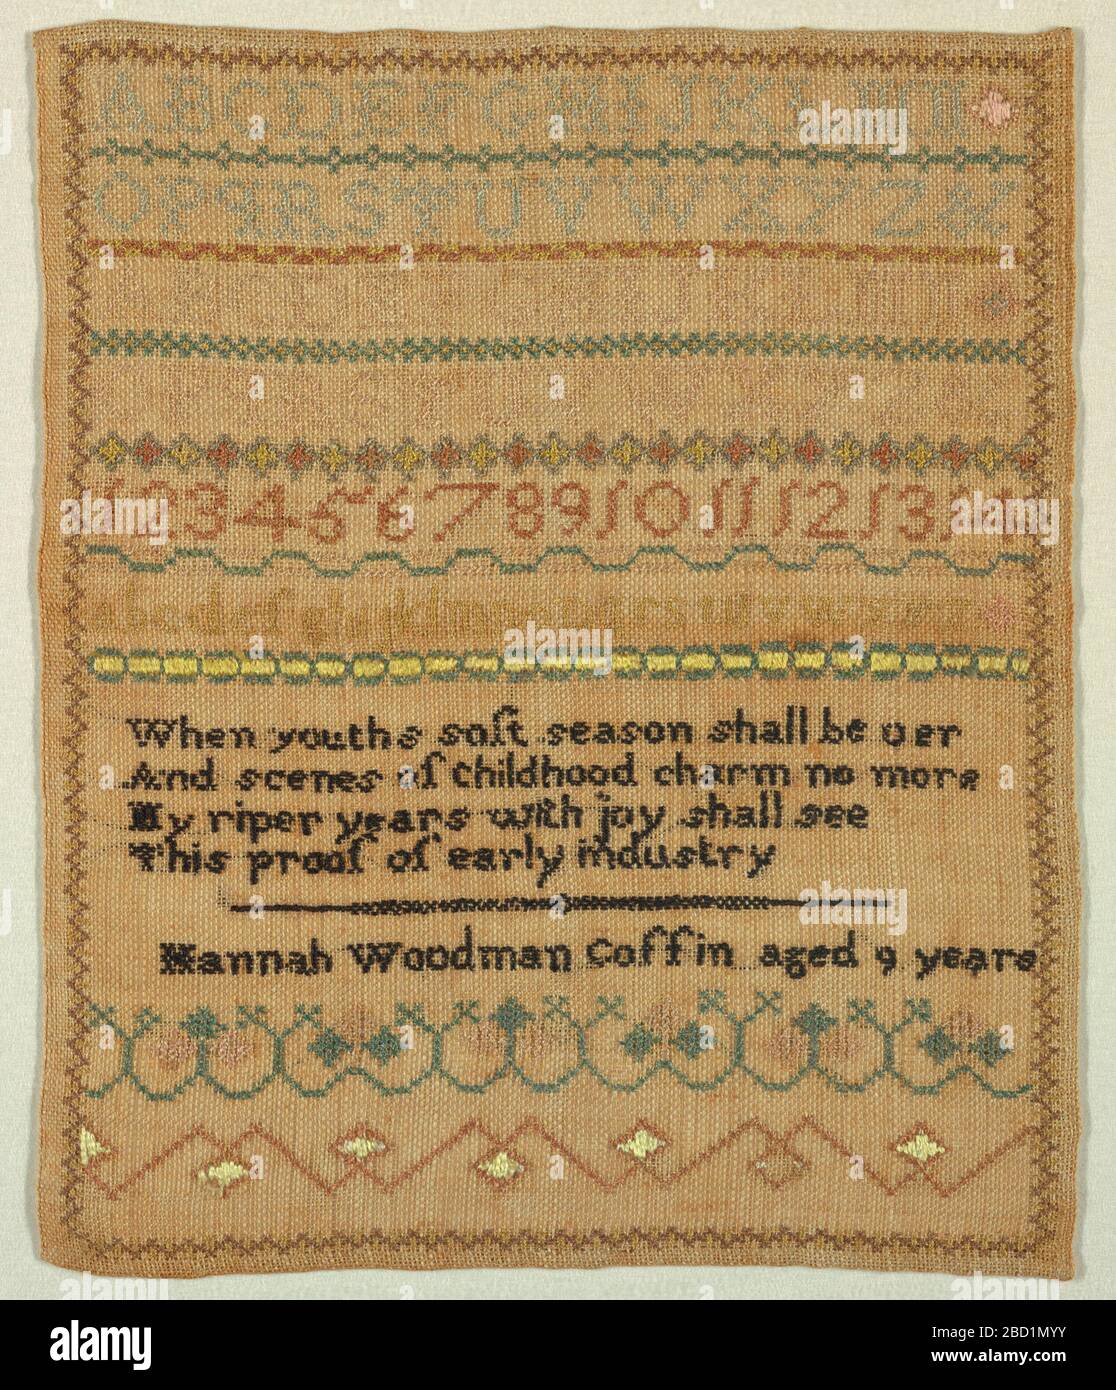 Sampler. Research in ProgressBands of alphabets and numerals separated by narrow geometric cross borders, a verse and inscription, in colored silks on tan linen.The verse reads:When youths soft season shall be oerAnd scenes of childhood charm no moreMy riper years with joy shall seeThis p Sampler Stock Photo